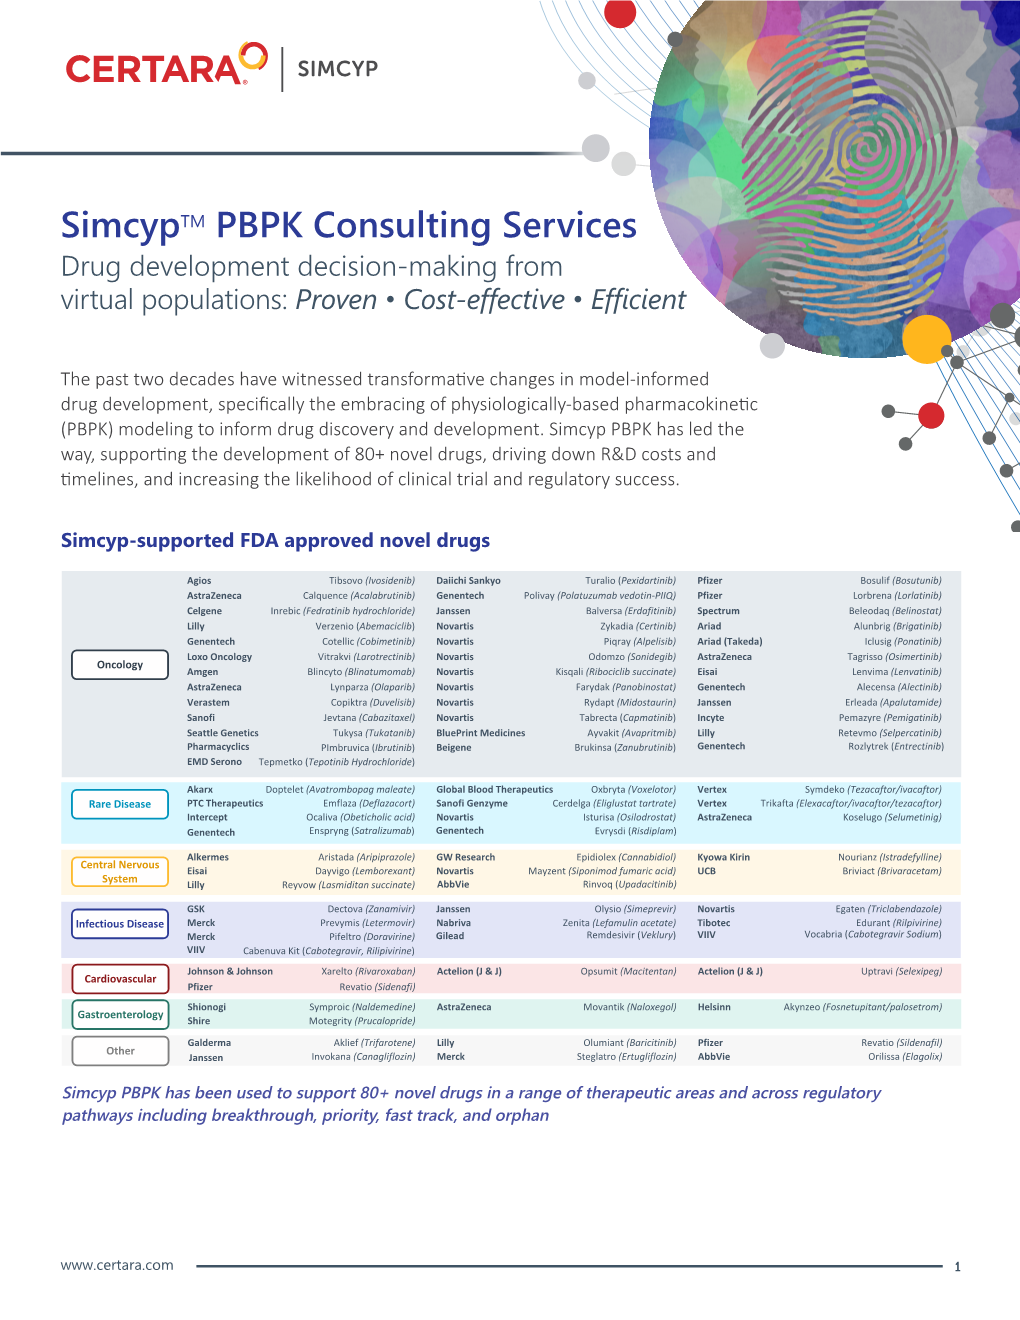 Simcyptm PBPK Consulting Services Drug Development Decision-Making from Virtual Populations: Proven • Cost-Effective • Efficient